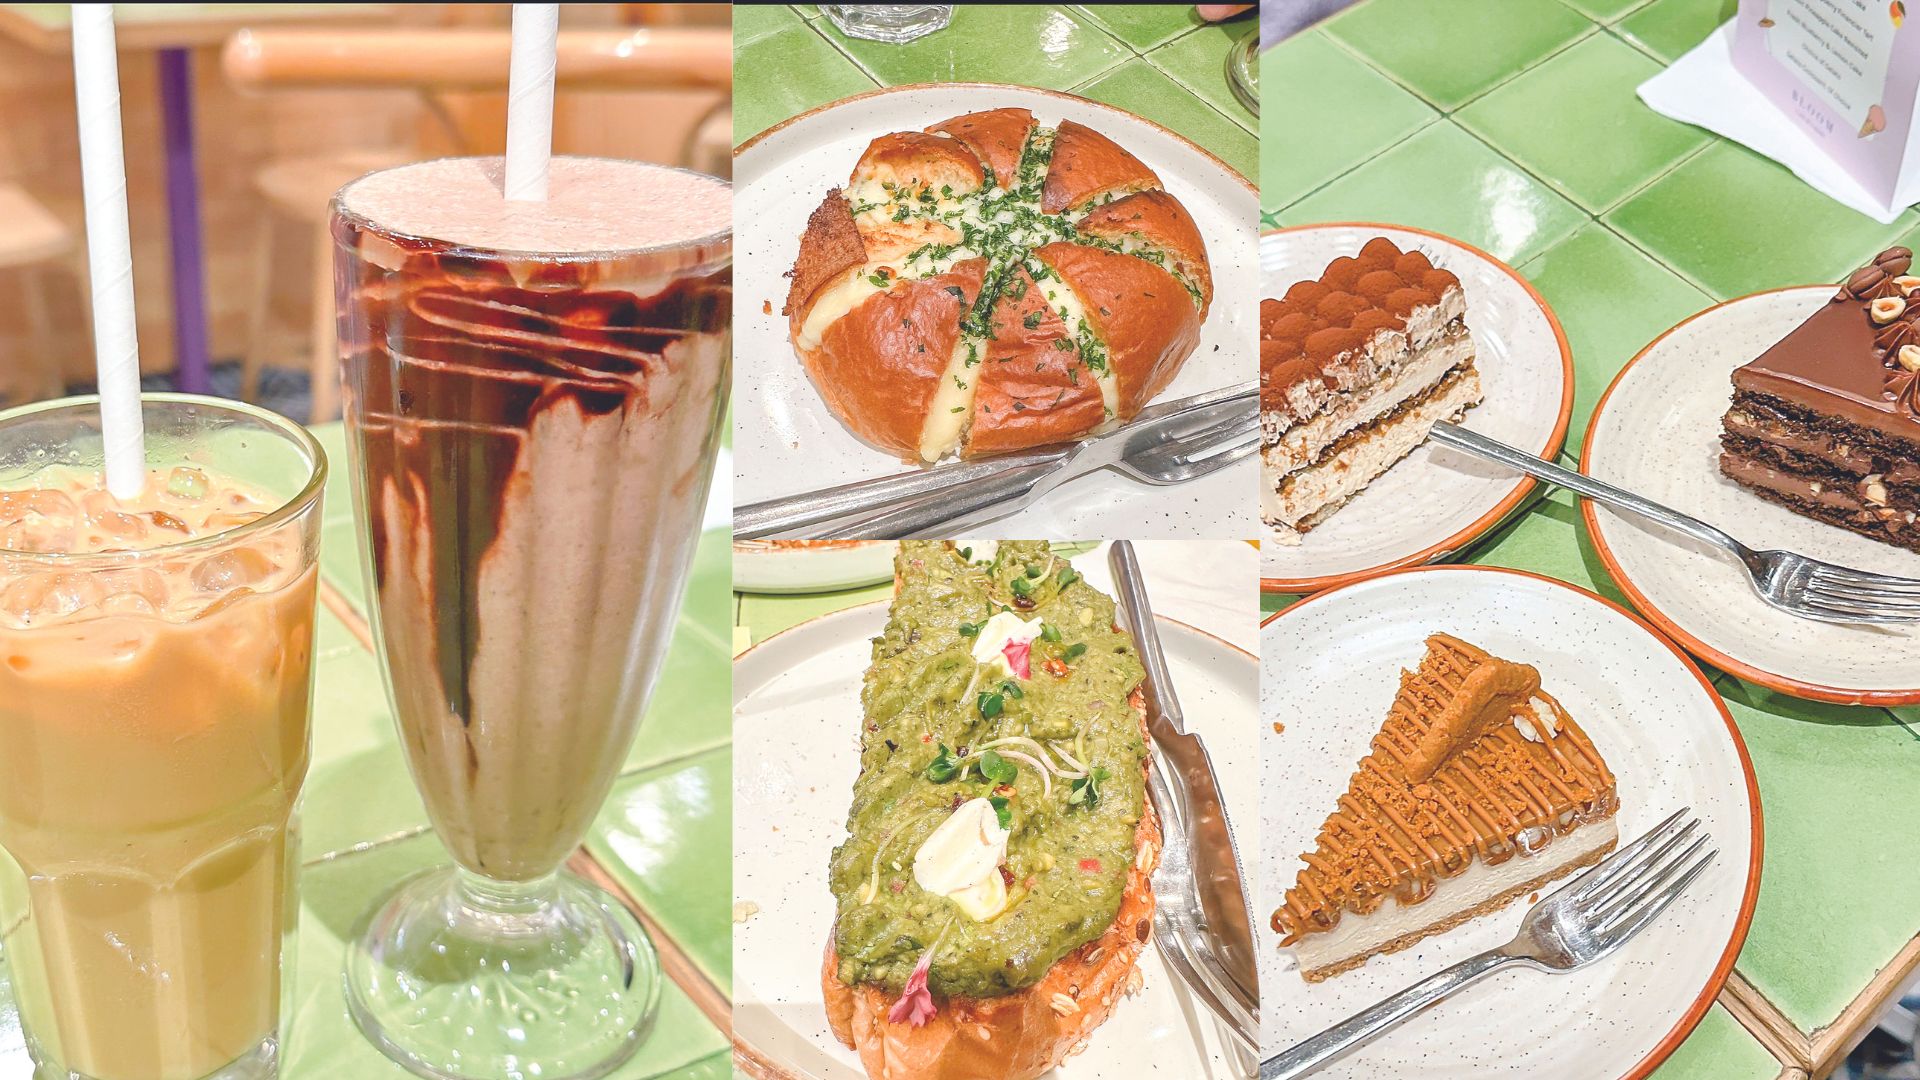 Bloom: Blooming with Desserts, Coffees, and Breads!